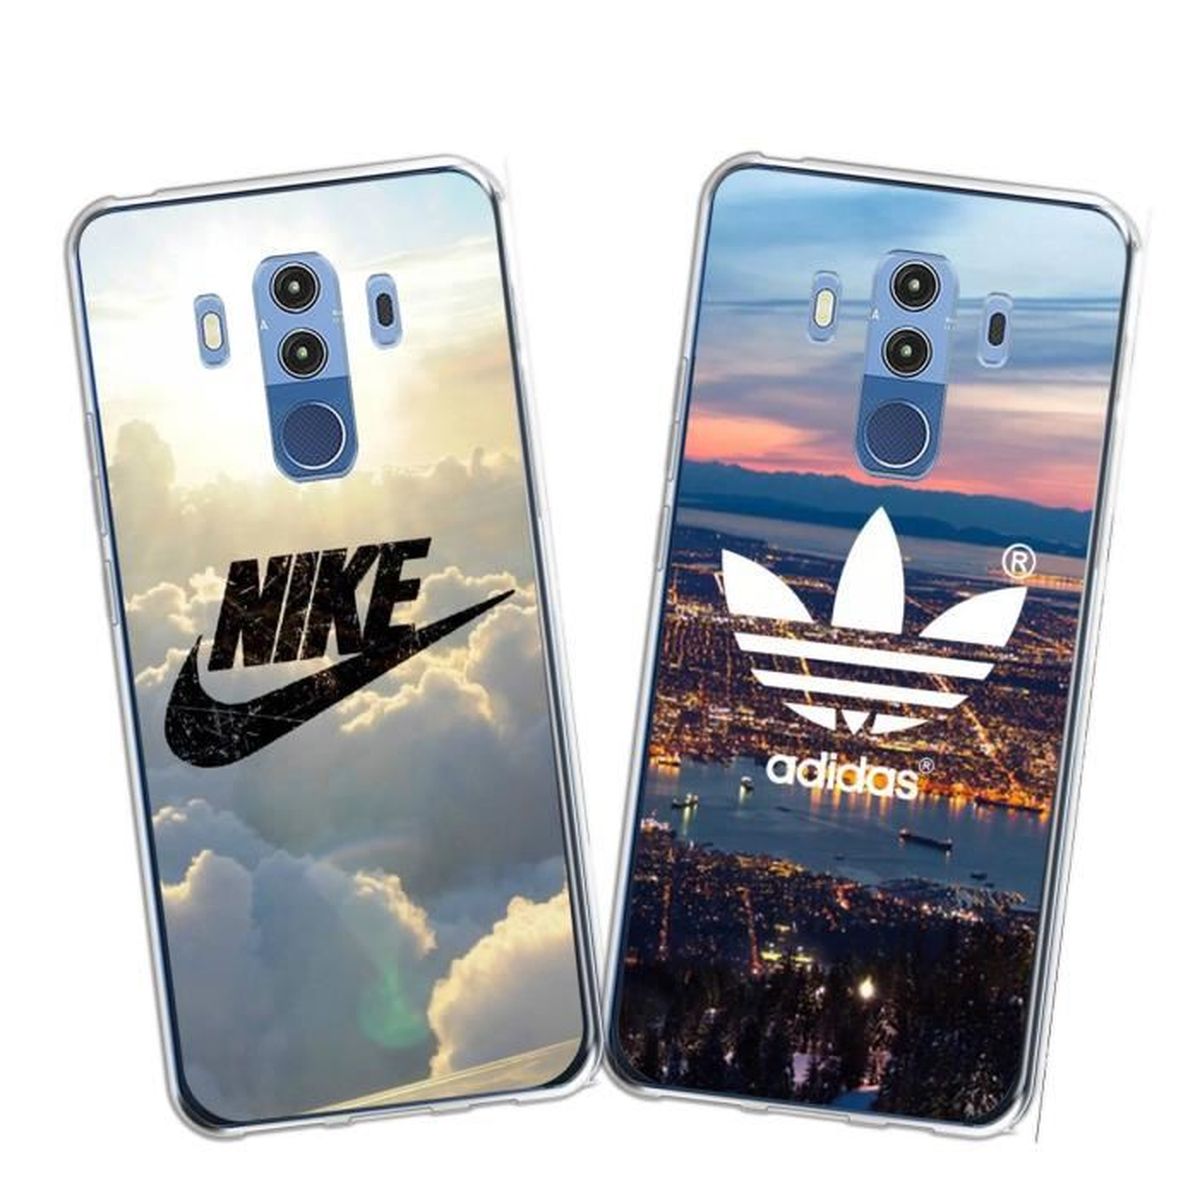 huawei mate 10 pro coque silicone